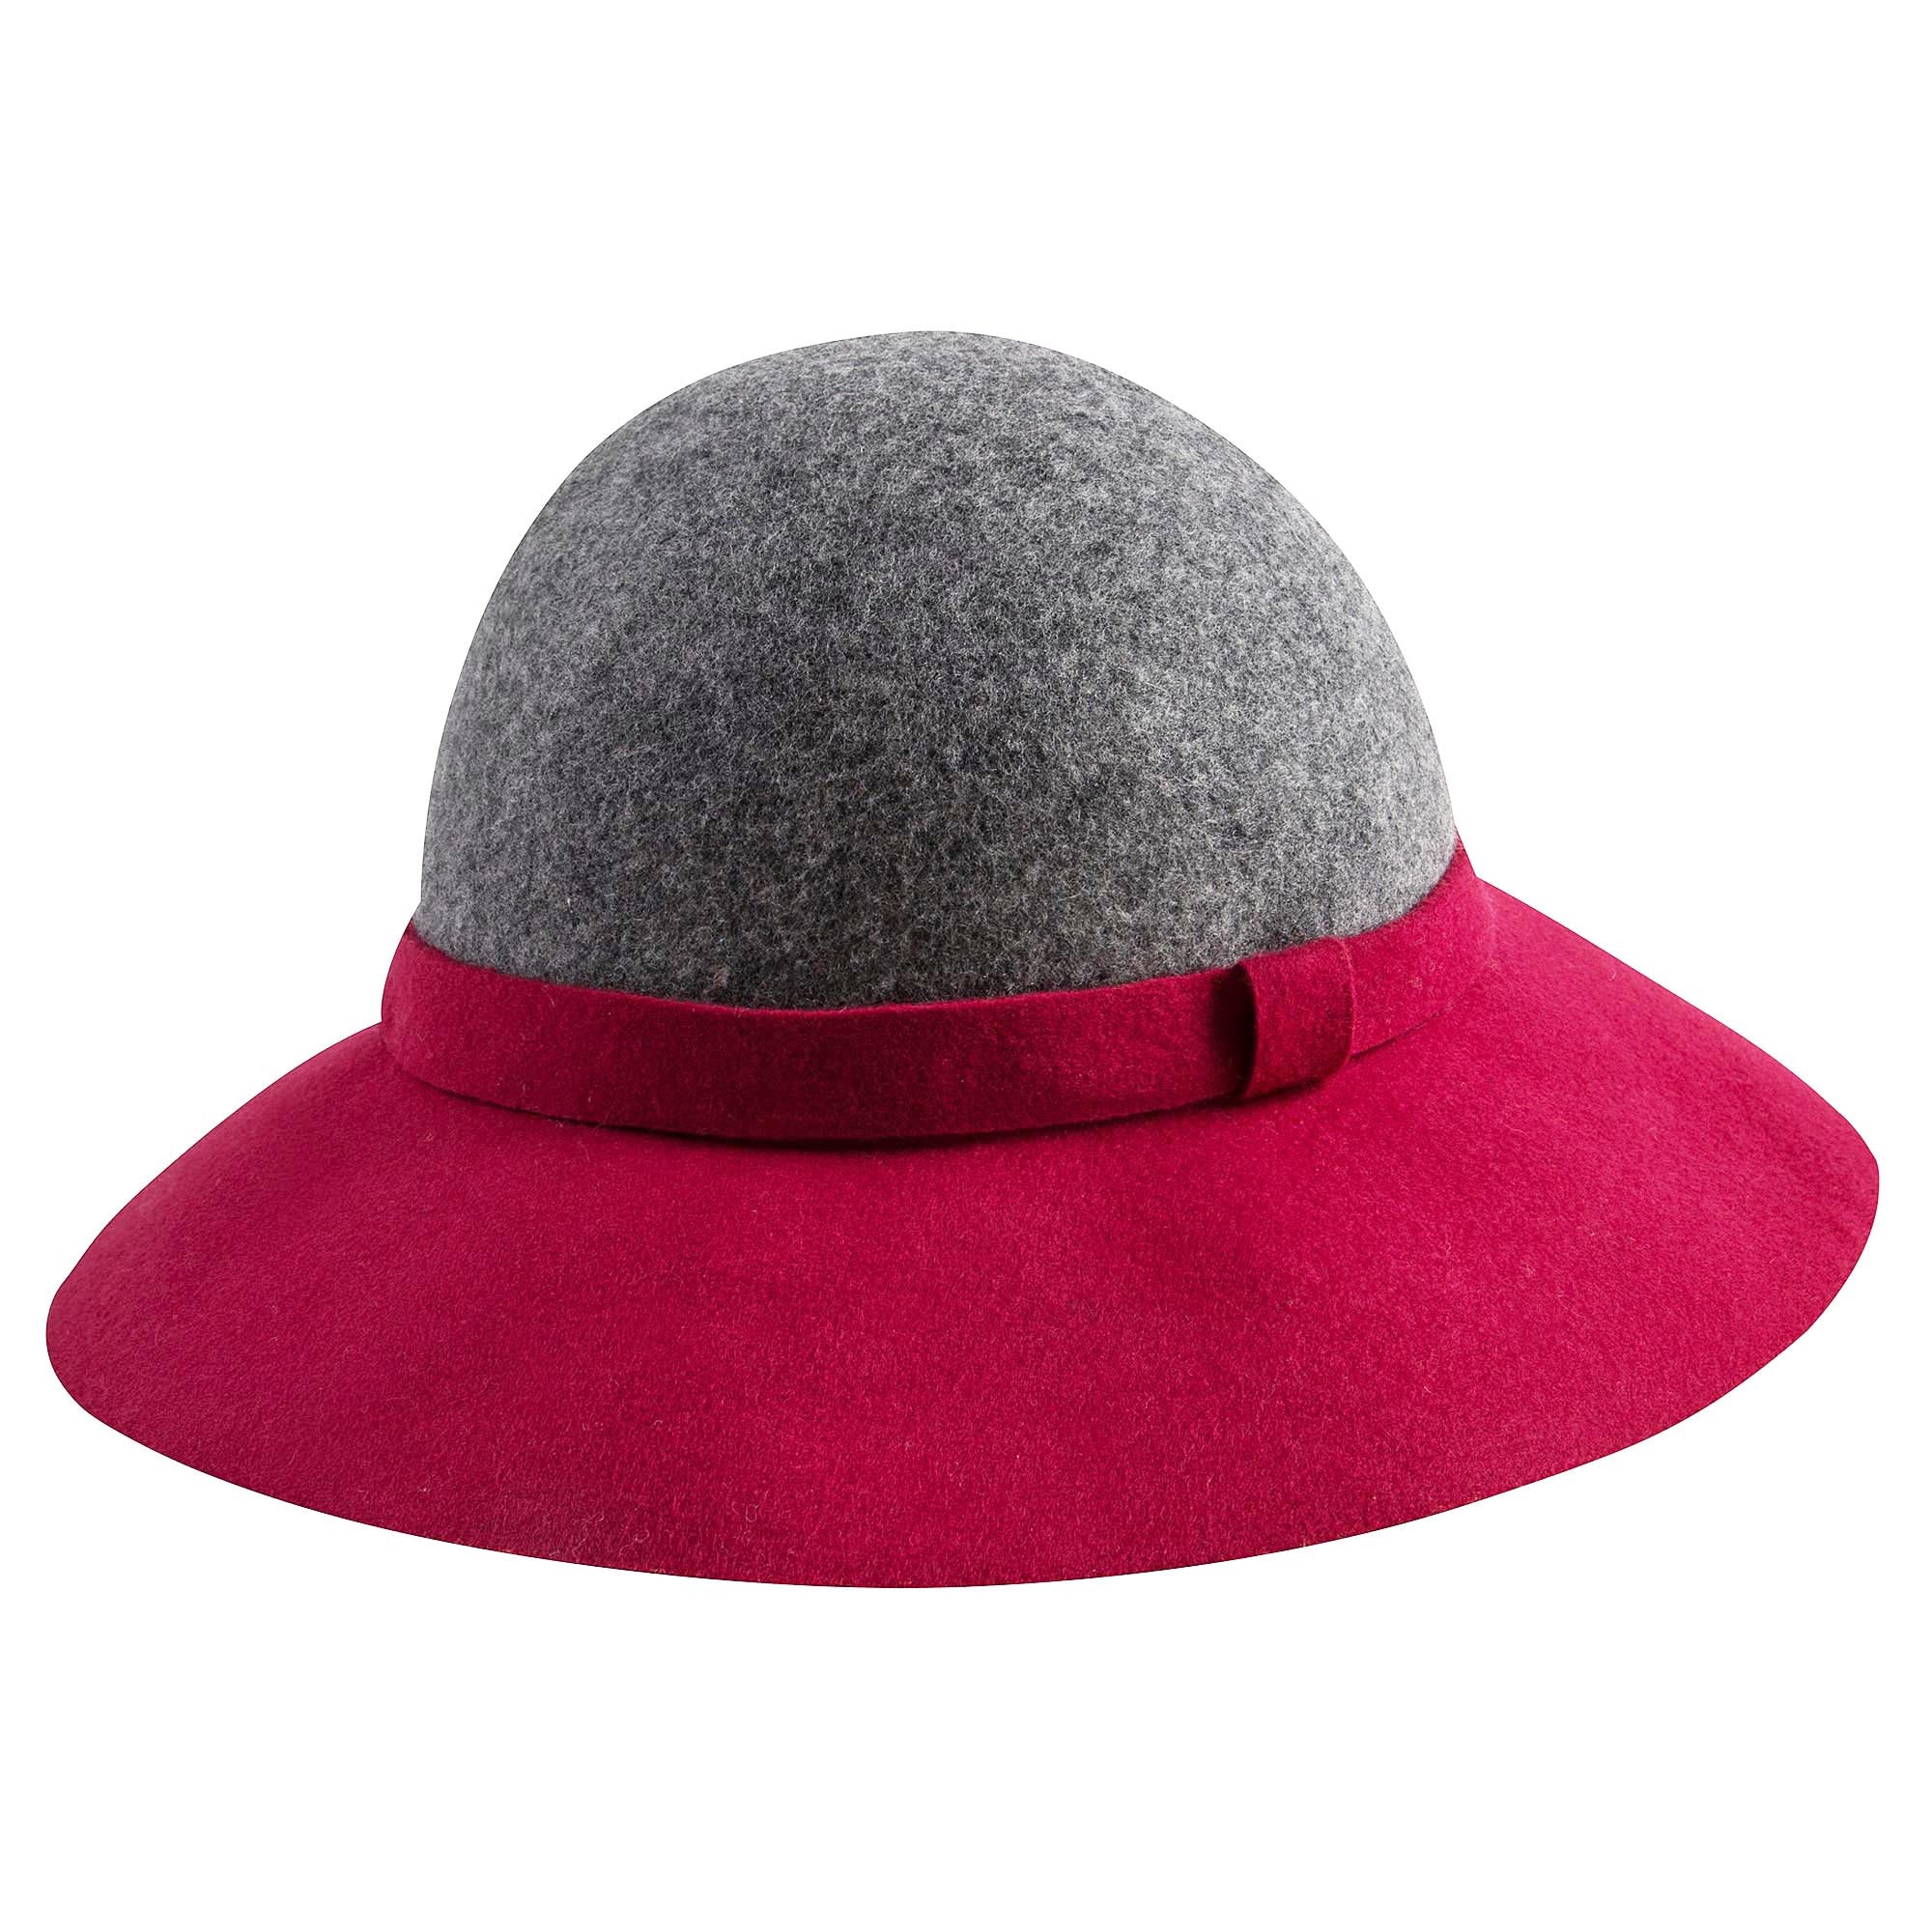 Girls Grey & Red Hat With Bow